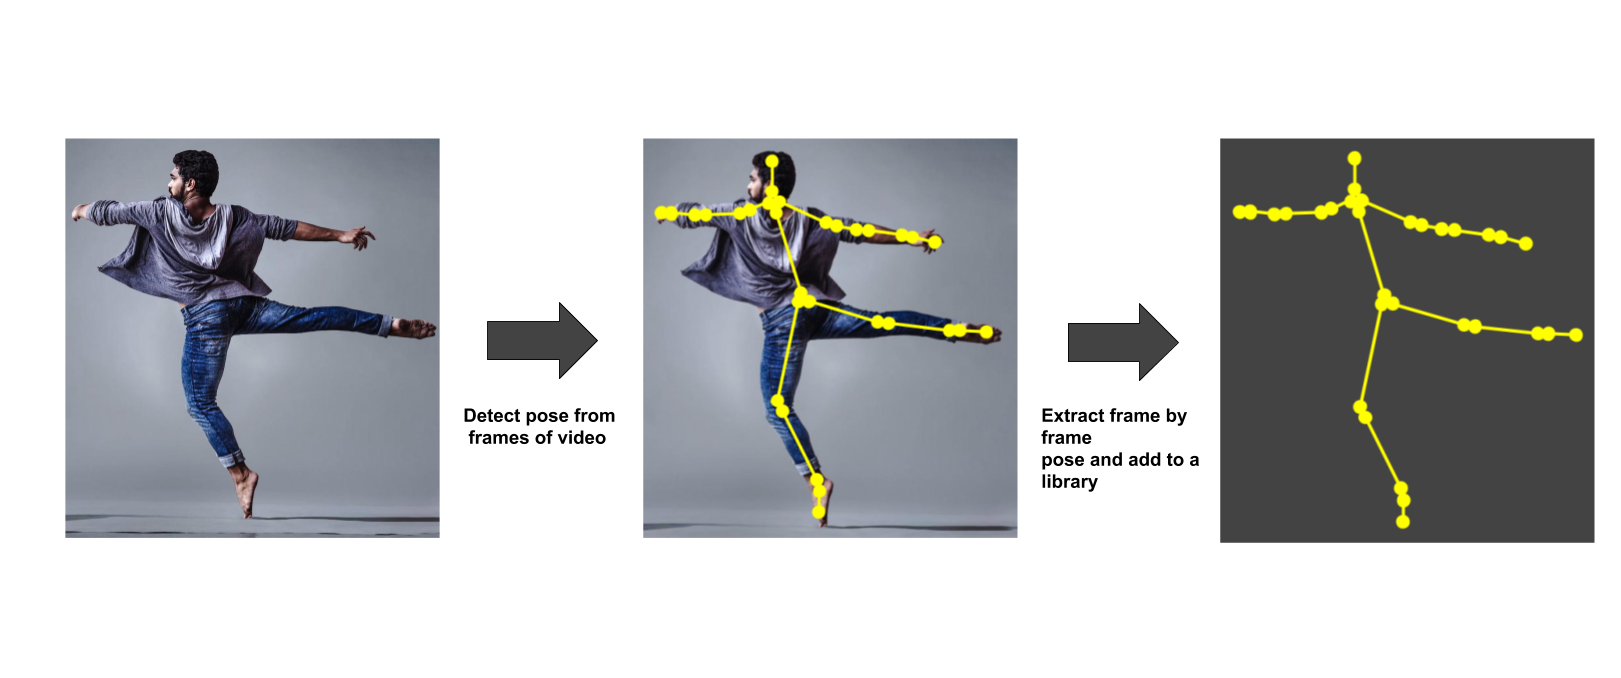 Model-based 3D body pose estimation from a single image